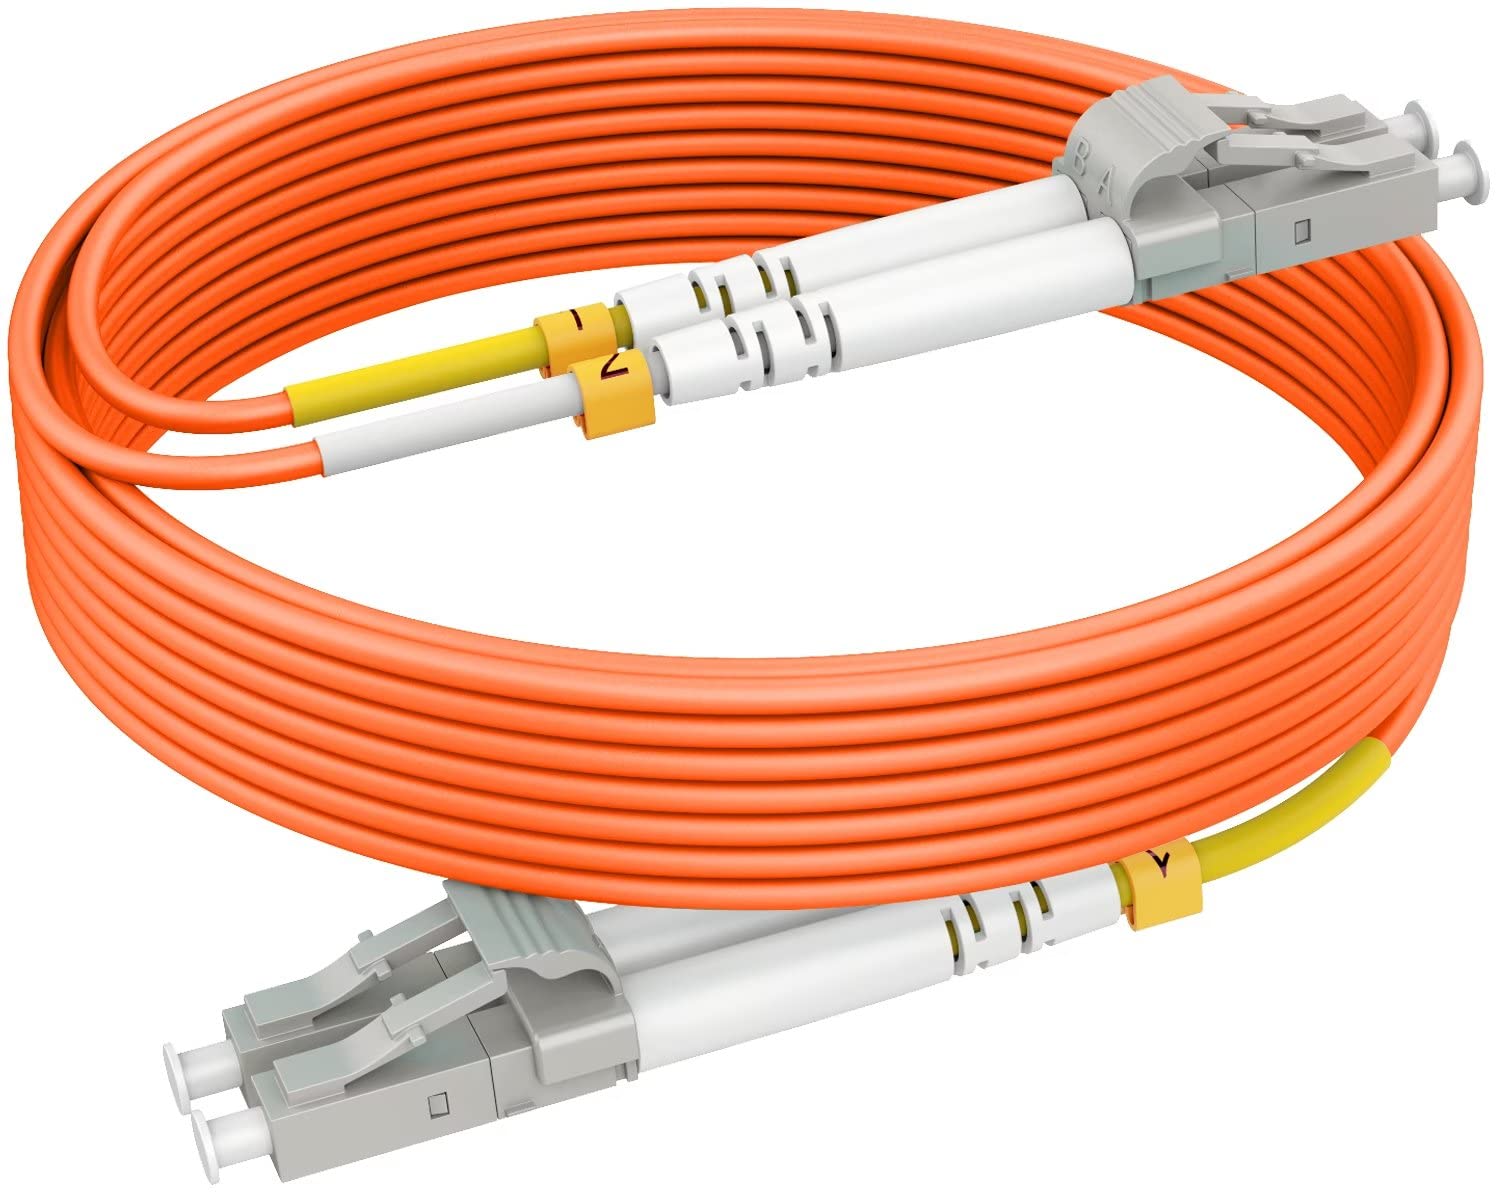 RamboCables 2m(6ft) LC LC OM2 Fiber Patch Cables MMF Multimode, Options 2m~150m, LC to LC Fiber Optic Patch Cords Duplex, 50/125μm 1G/10G LSZH